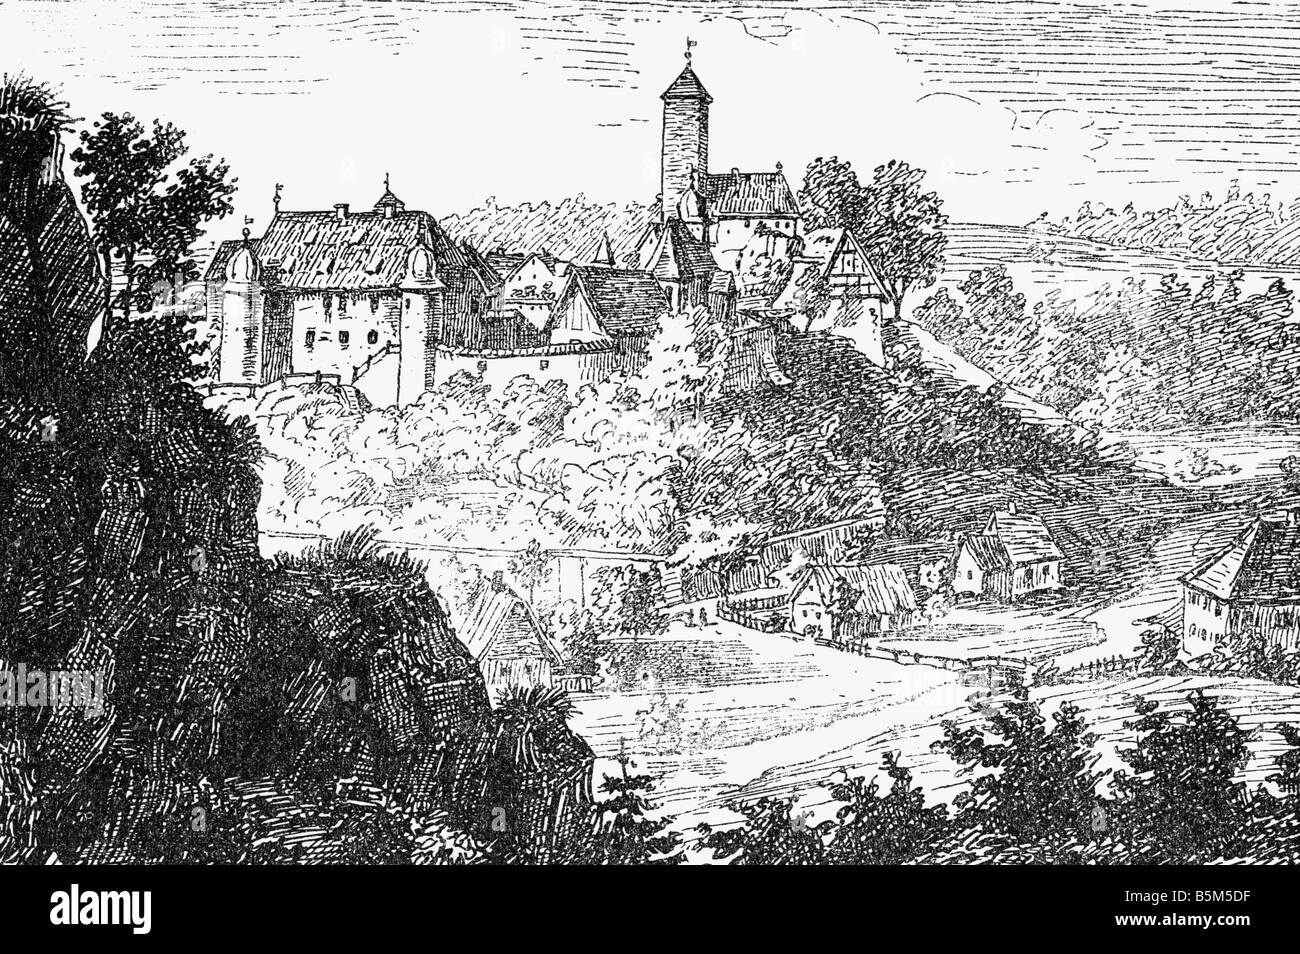 architecture, castles, Germany, Bavaria, Aufsess Castle, exterior view, wood engraving, 19th century, landscape, mountains, Franconian Switzerland, Upper Franconia, historic, historical, Stock Photo